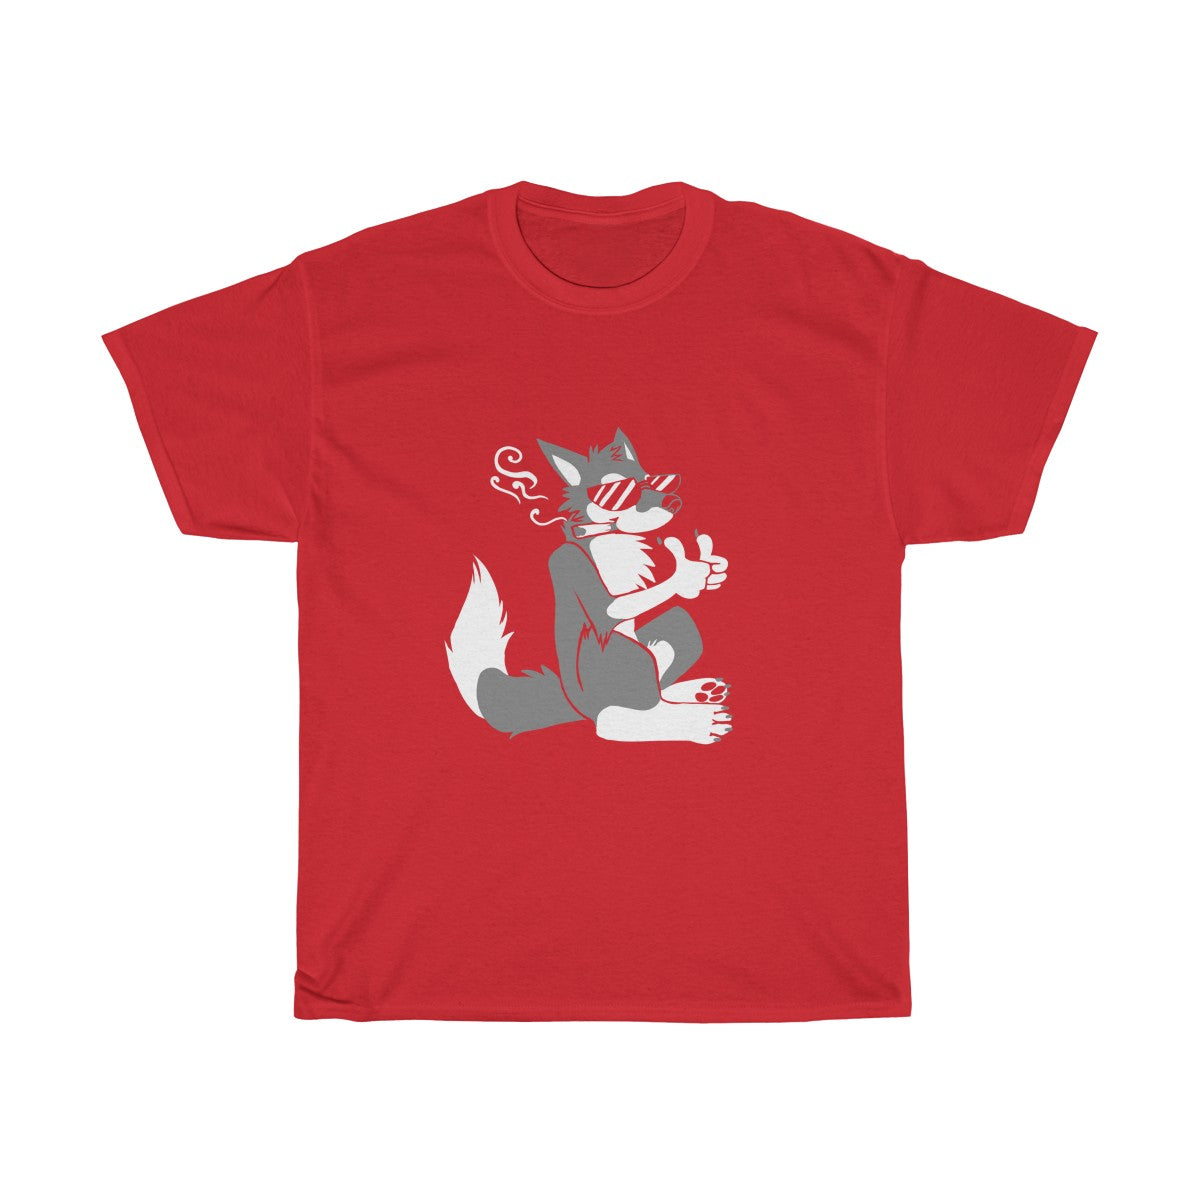 Chill Out - T-Shirt T-Shirt Dire Creatures Red S 